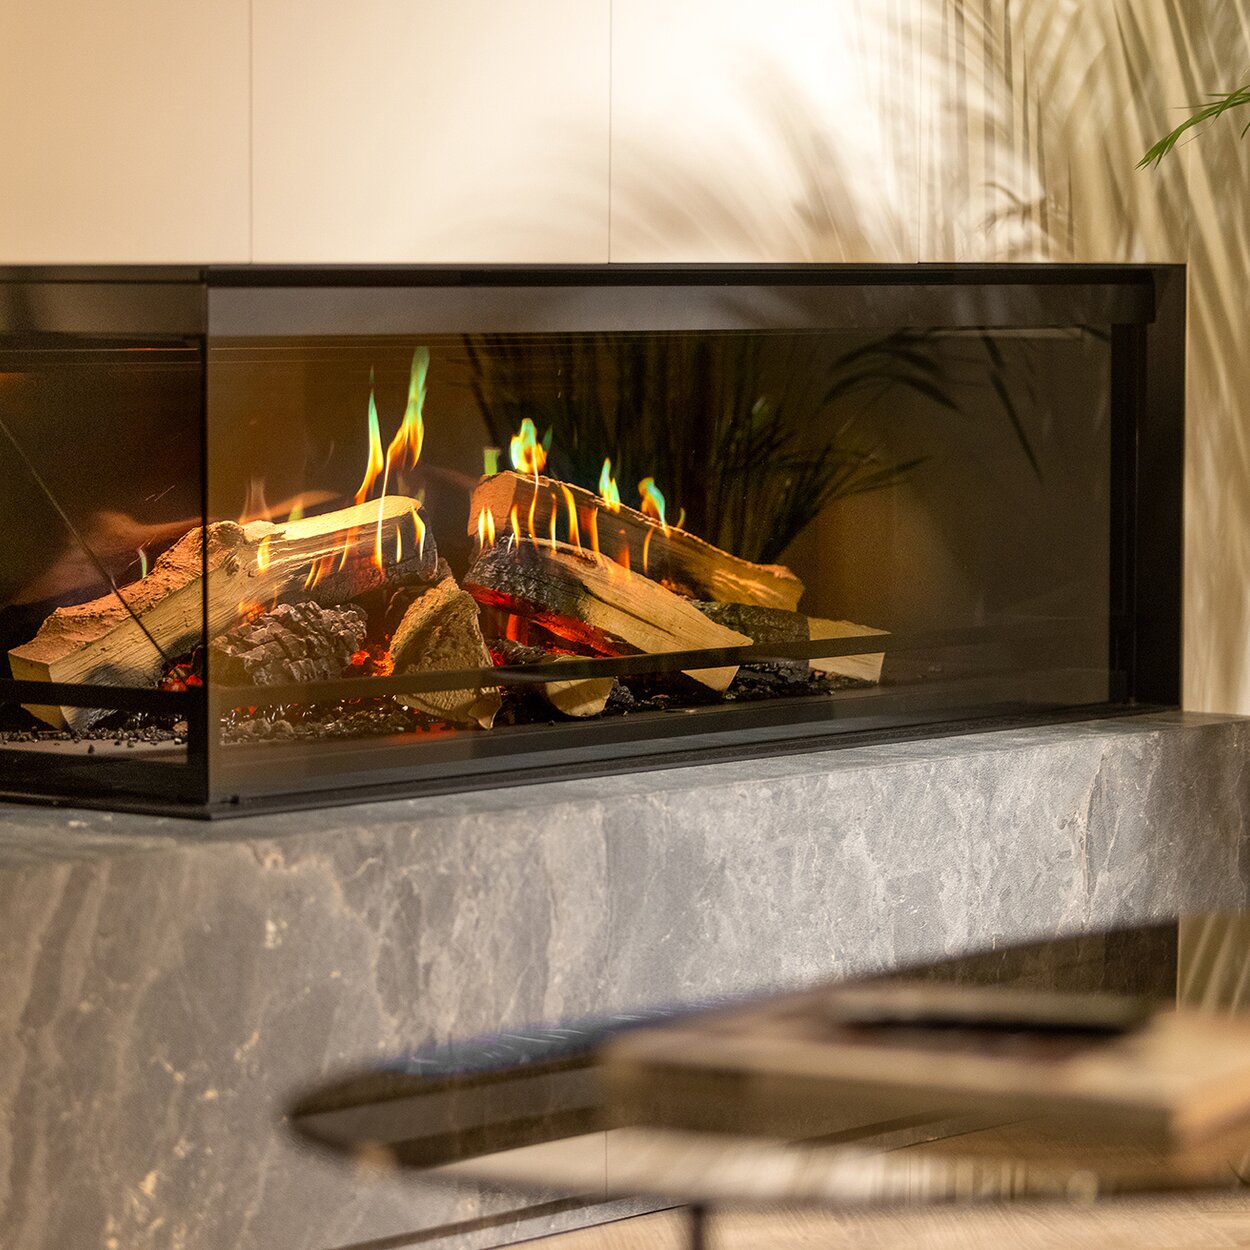 The realistic ceramic wood logs and holographic flames look authentic.